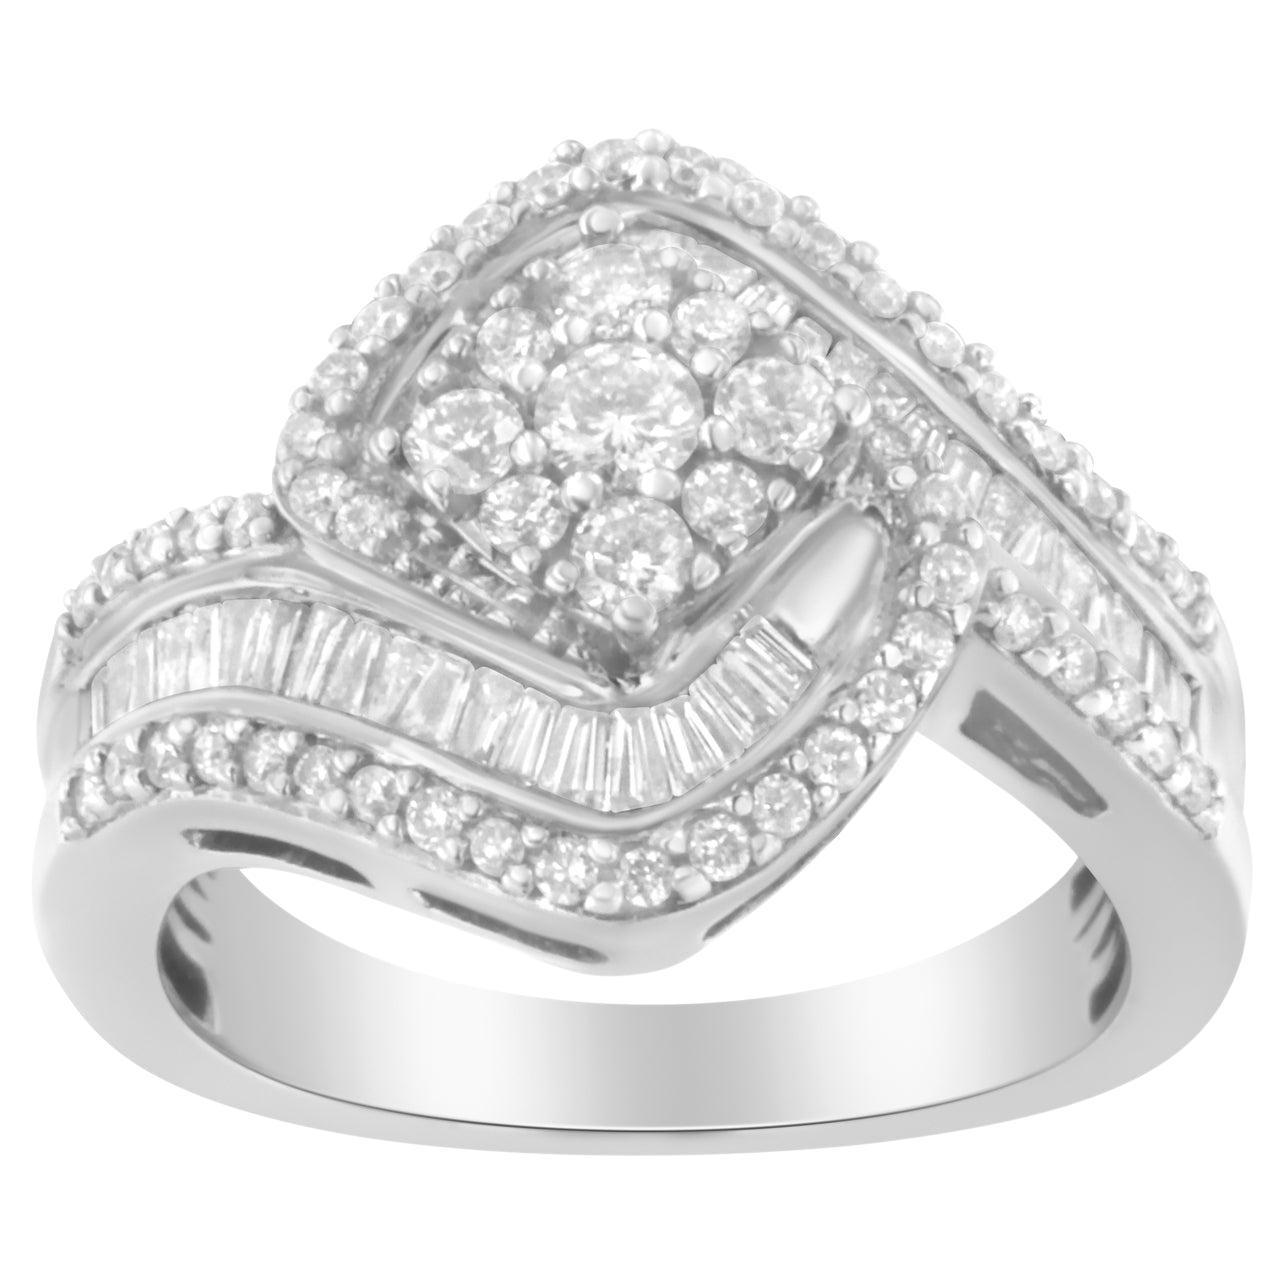 14K White Gold 1.00 Carat Diamond Floral Cluster Engagement or Fashion Ring For Sale